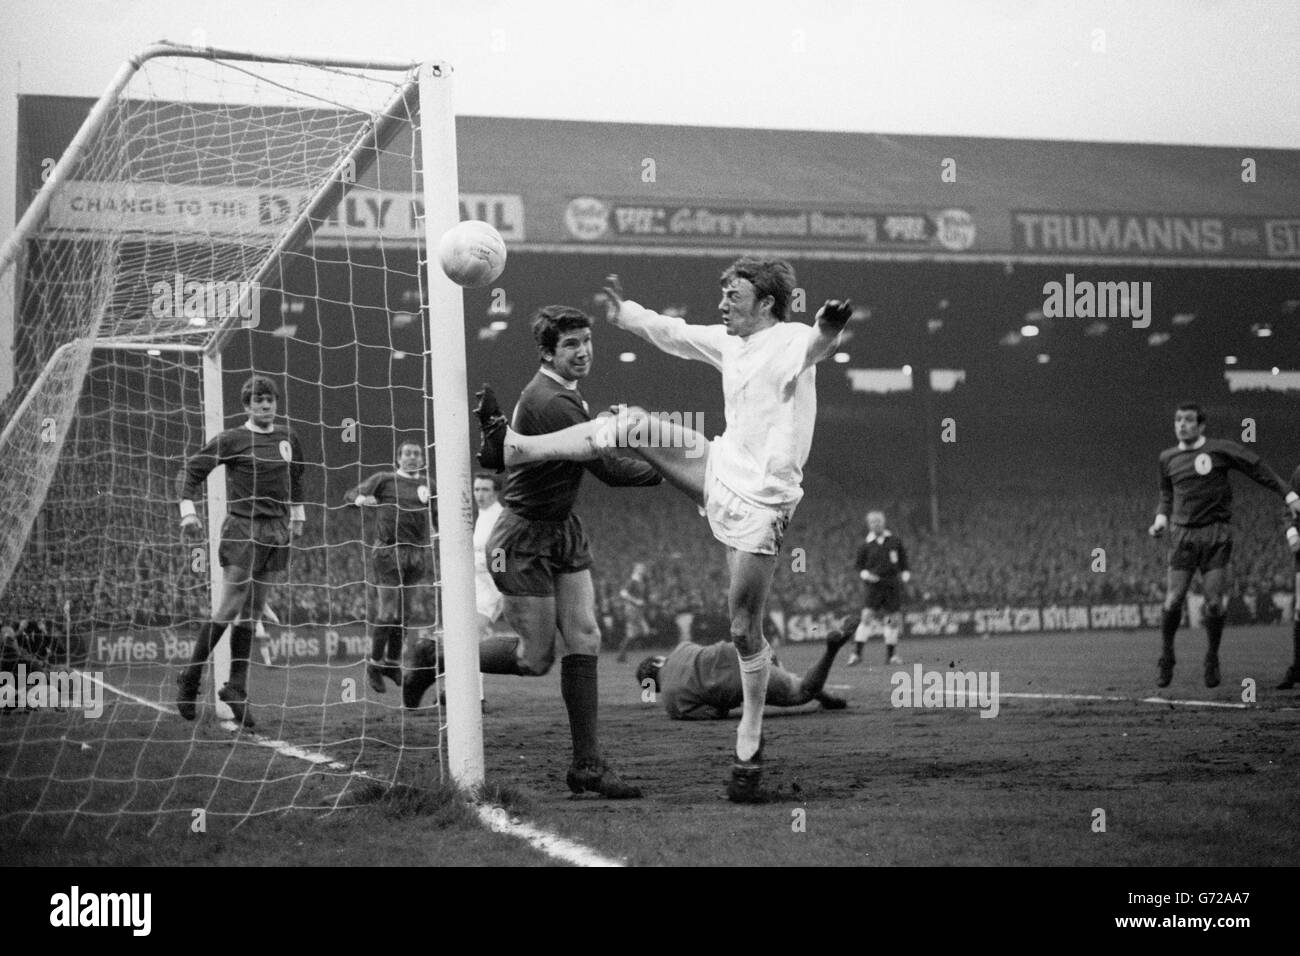 West Bromwich Albion forward Clive Clark tries to score from a corner as Liverpool goalkeeper Tommy Lawrence lies beaten to the ball behind him during the second replay of the sixth round FA Cup tie at Maine Road, Manchester. West Bromwich won the match 2-1. Stock Photo